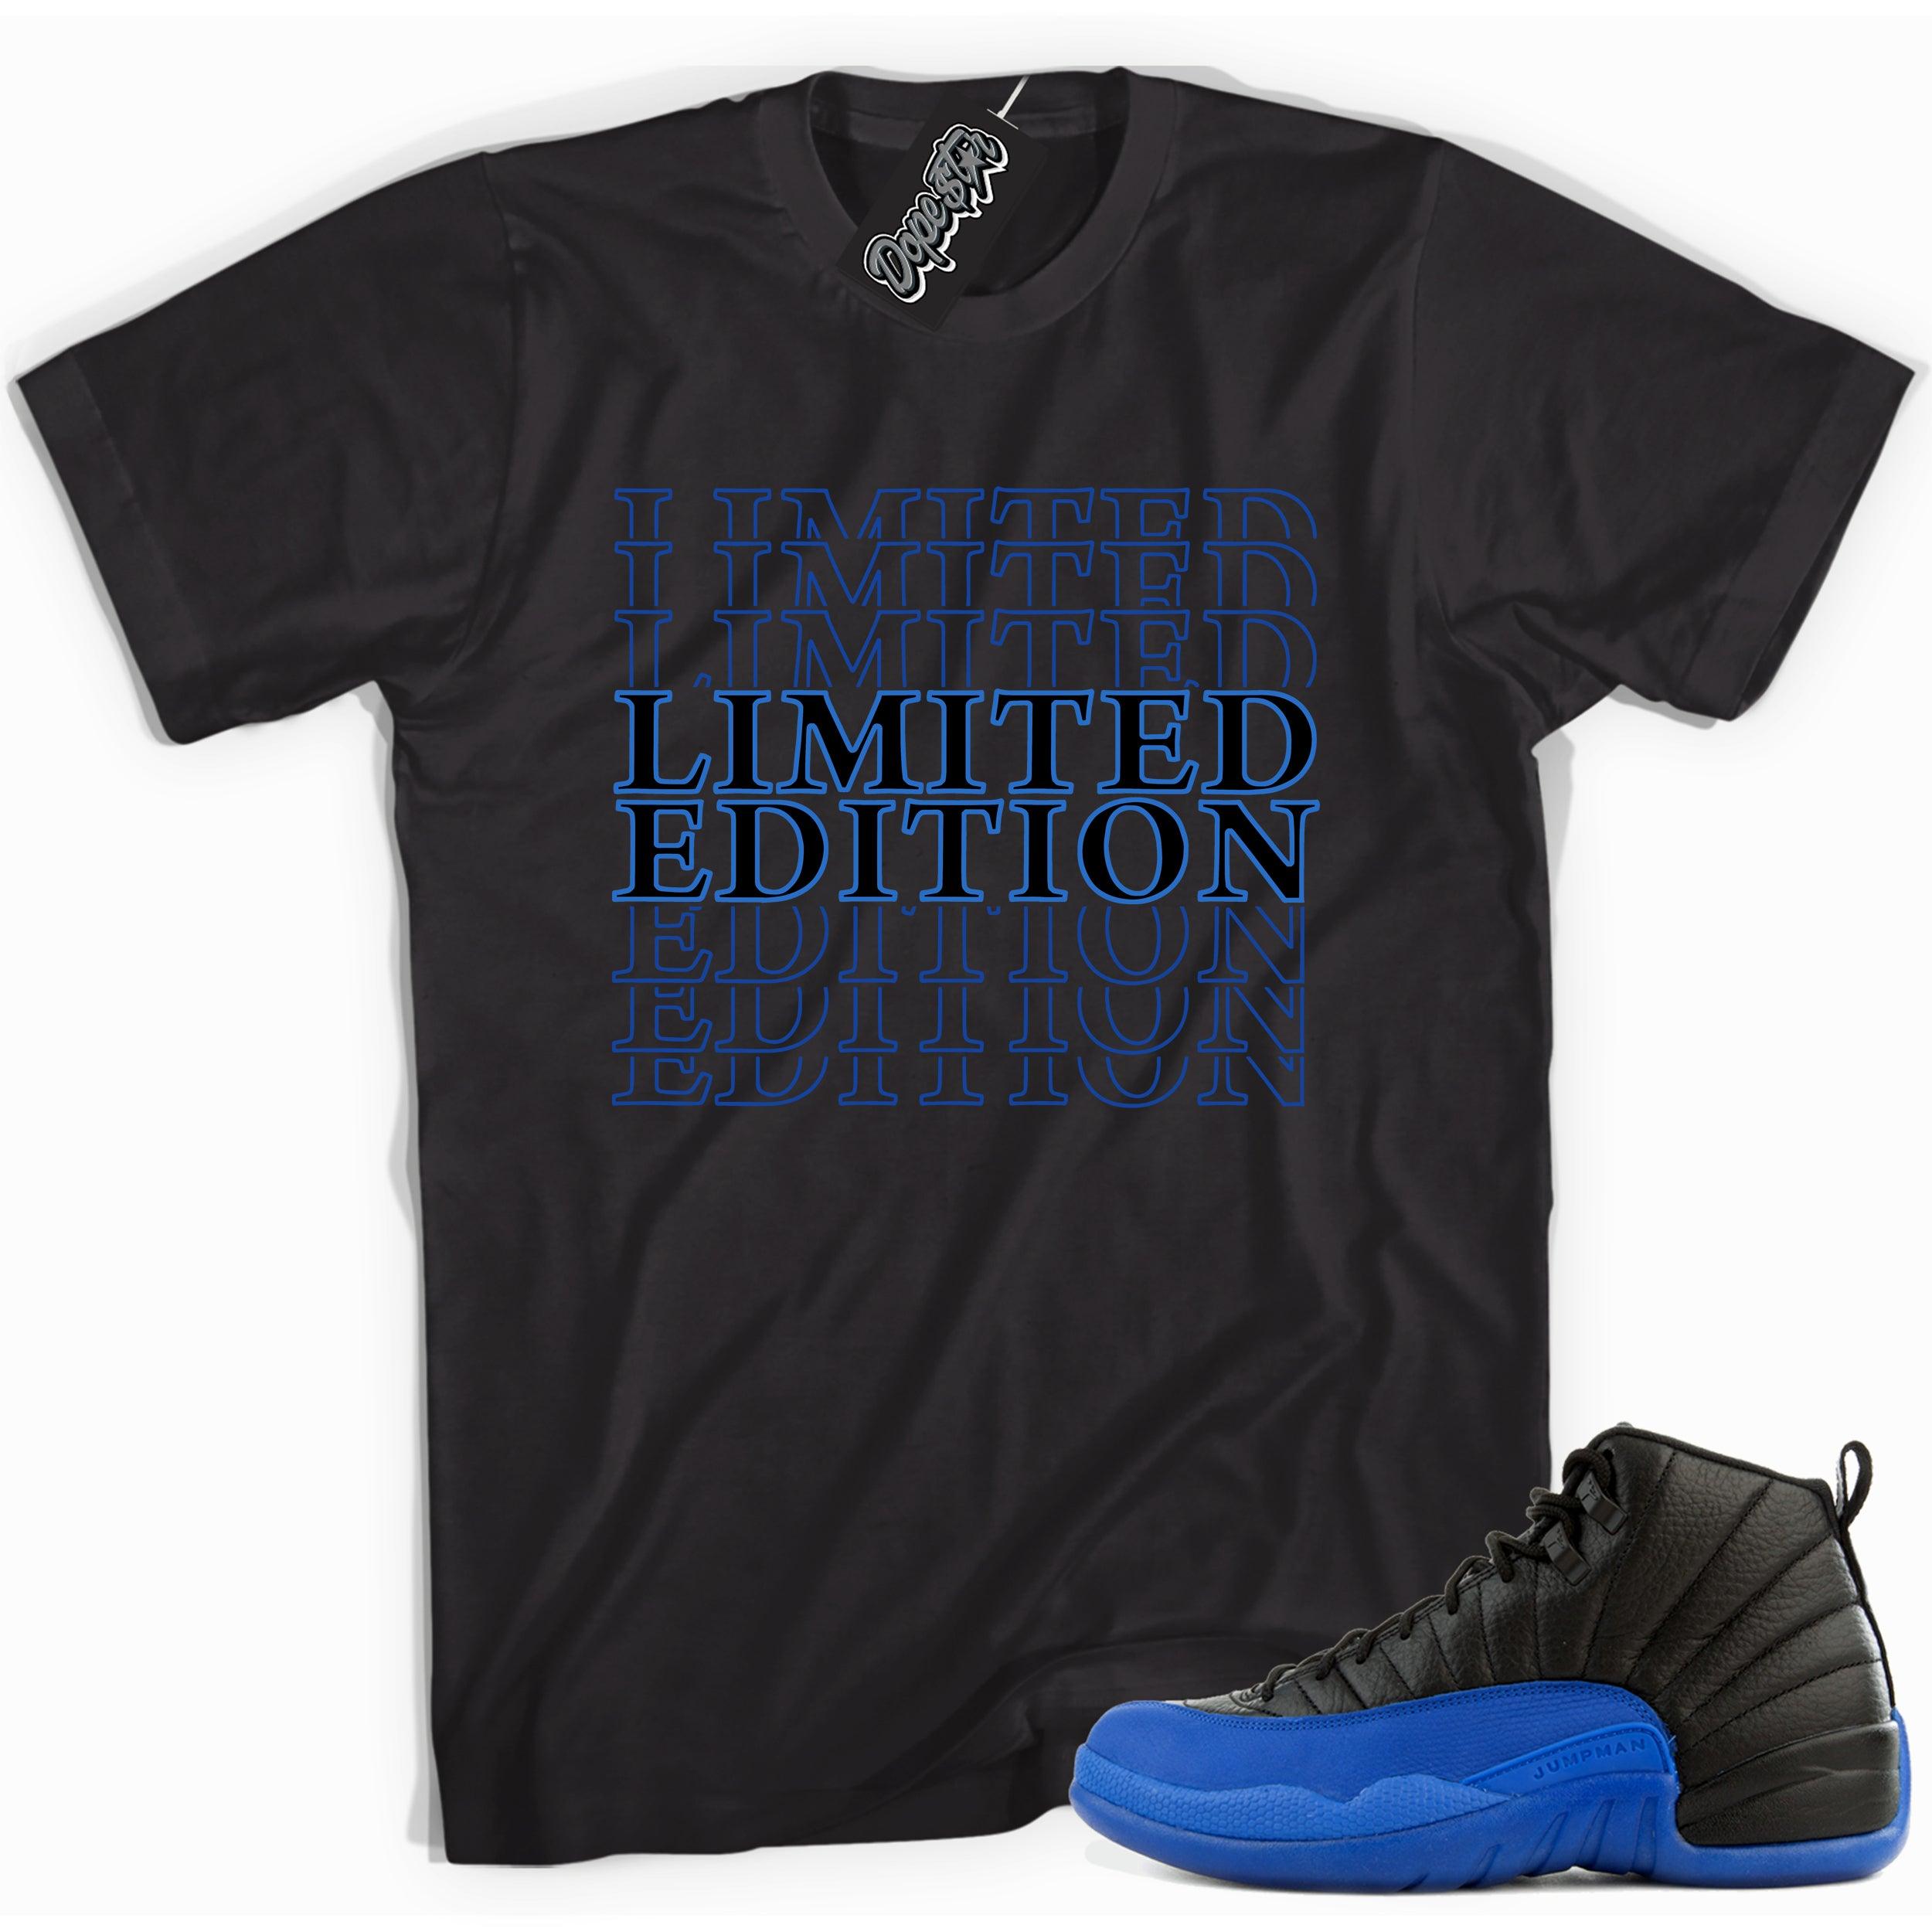 Cool black graphic tee with 'limited edition' print, that perfectly matches  Air Jordan 12 Retro Black Game Royal sneakers.